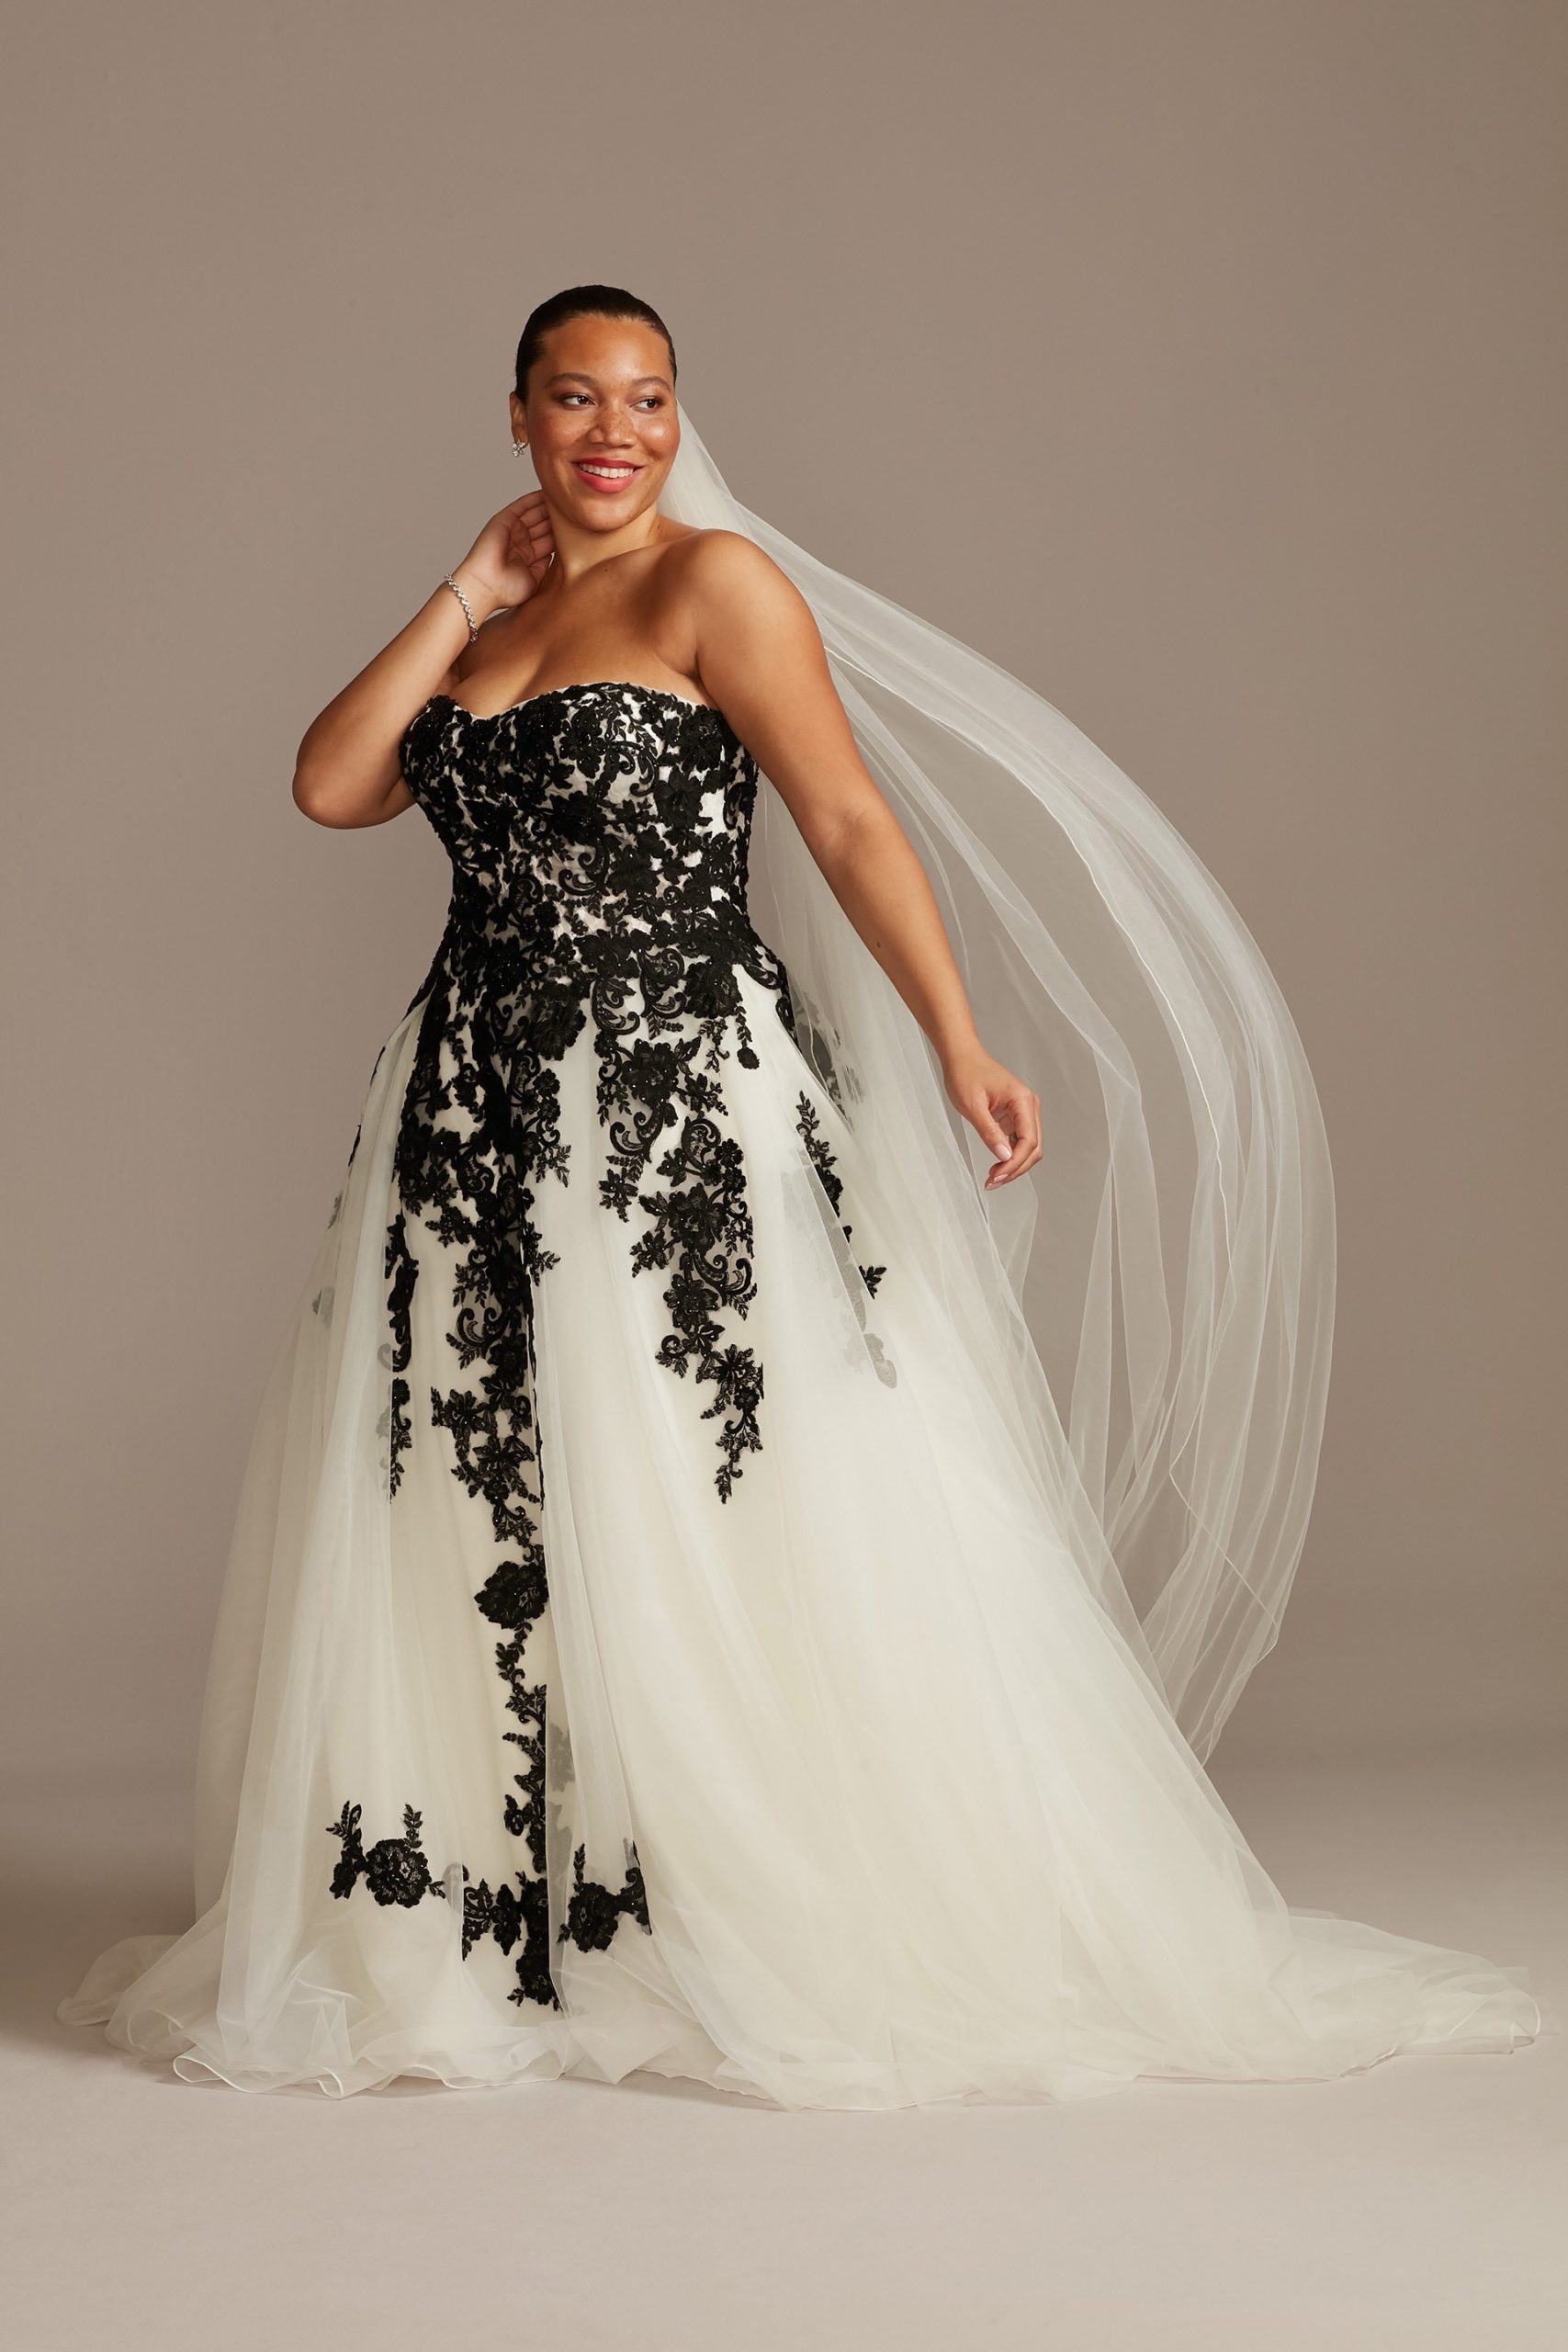 Black and white floral wedding dress